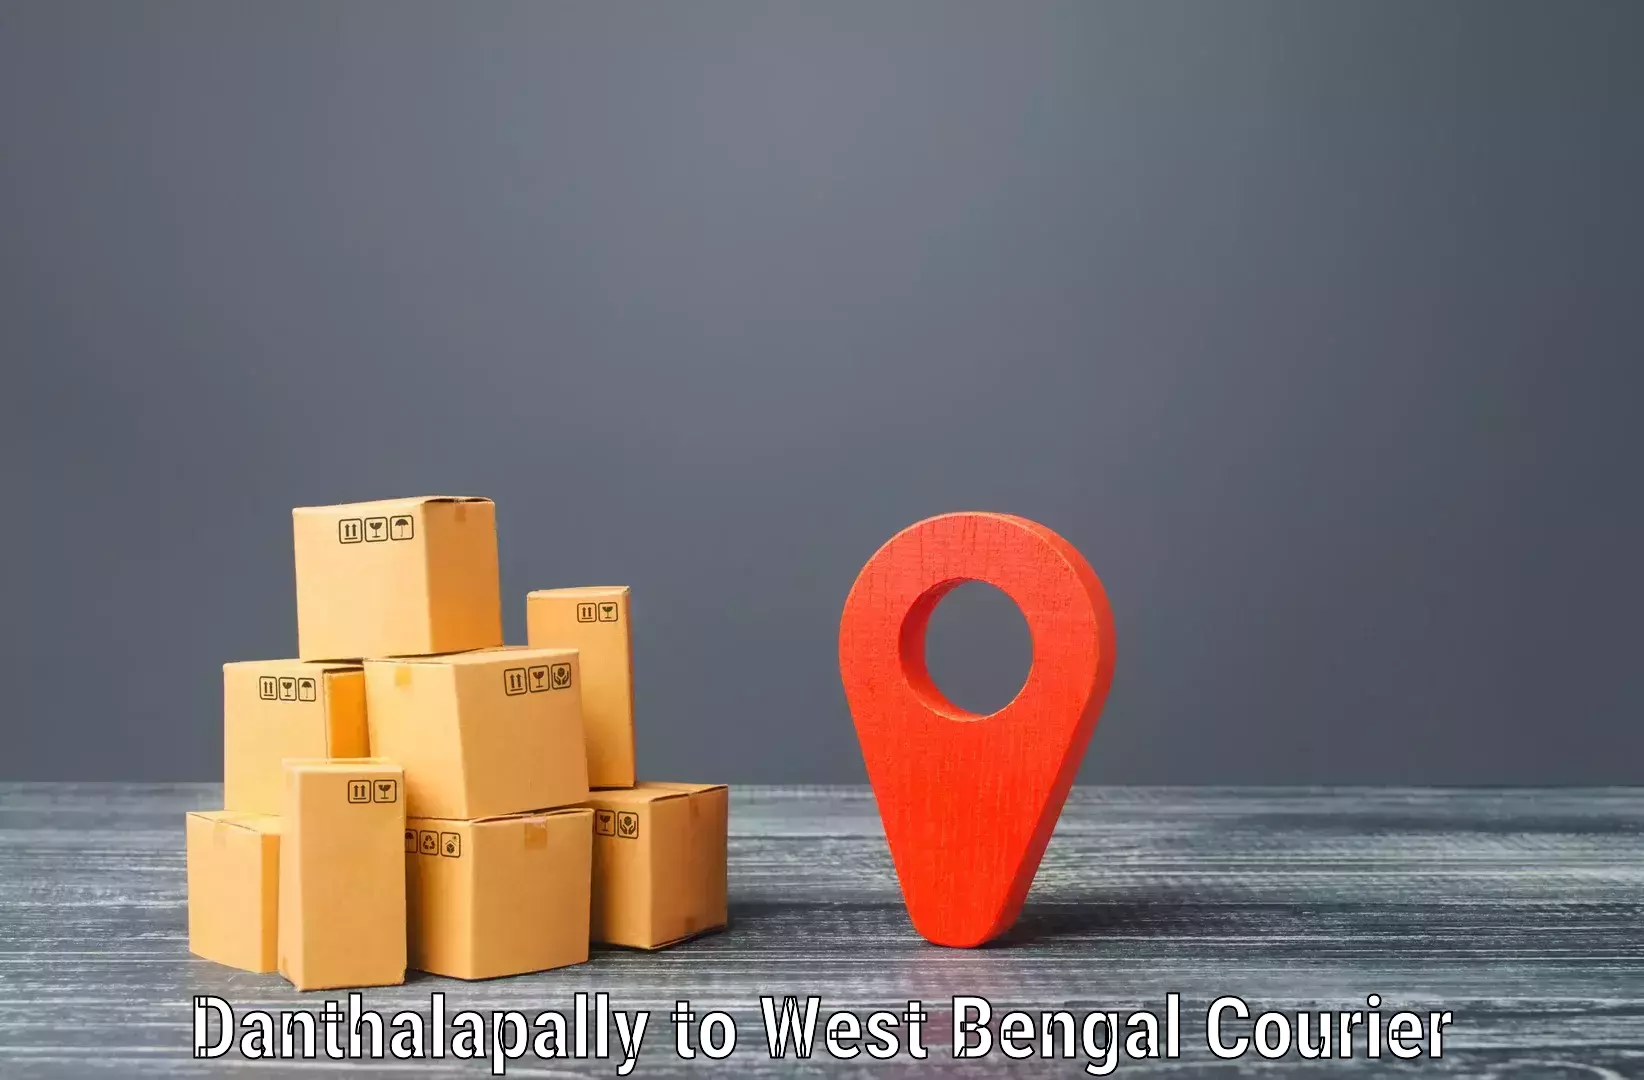 Smart logistics solutions Danthalapally to North 24 Parganas